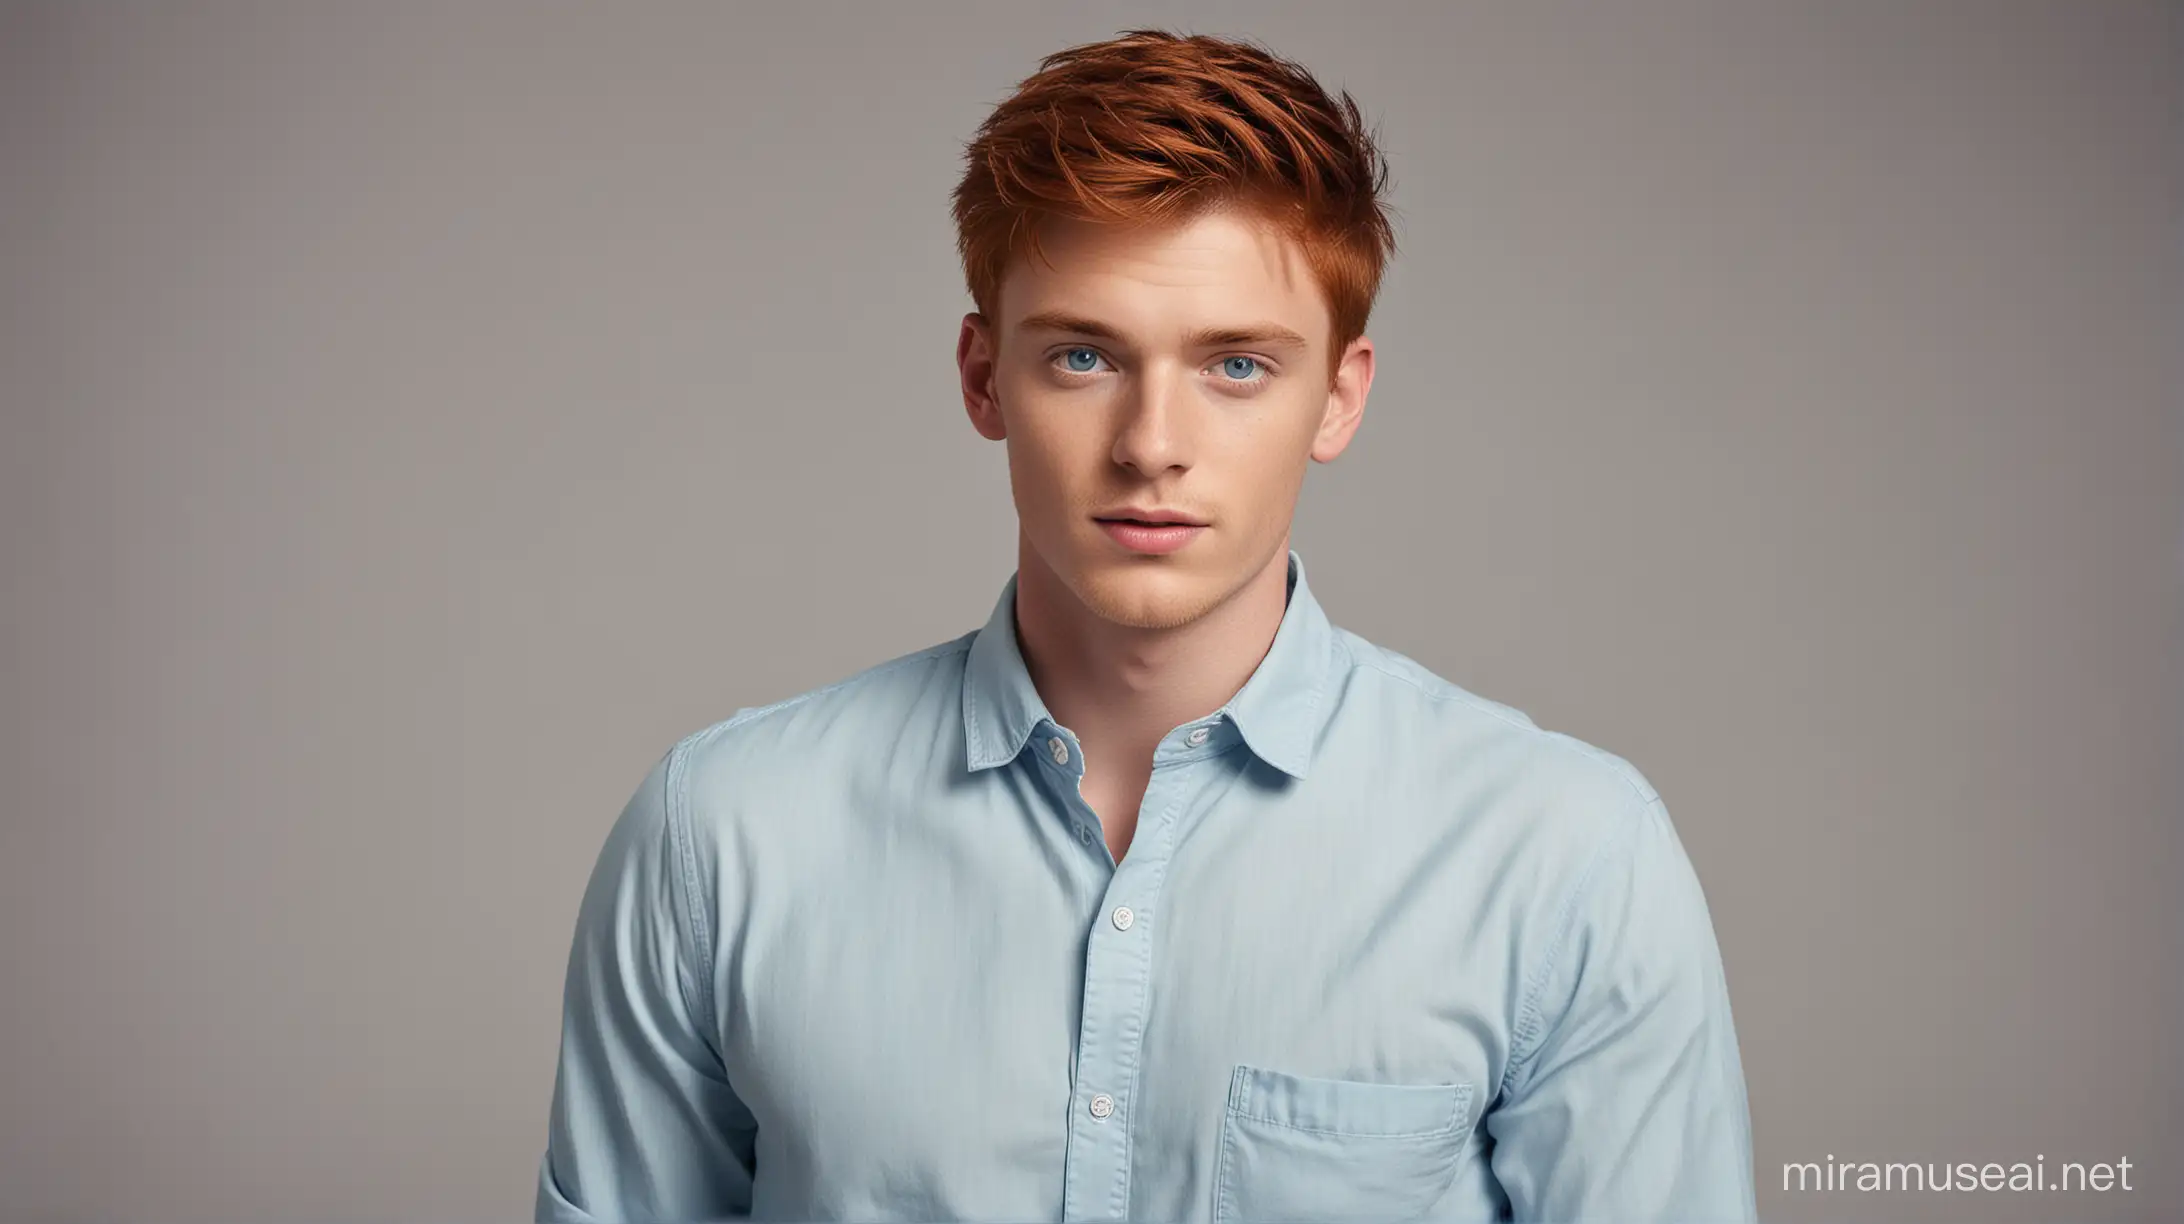 Young Man with Red Hair and Blue Eyes in Casual Attire